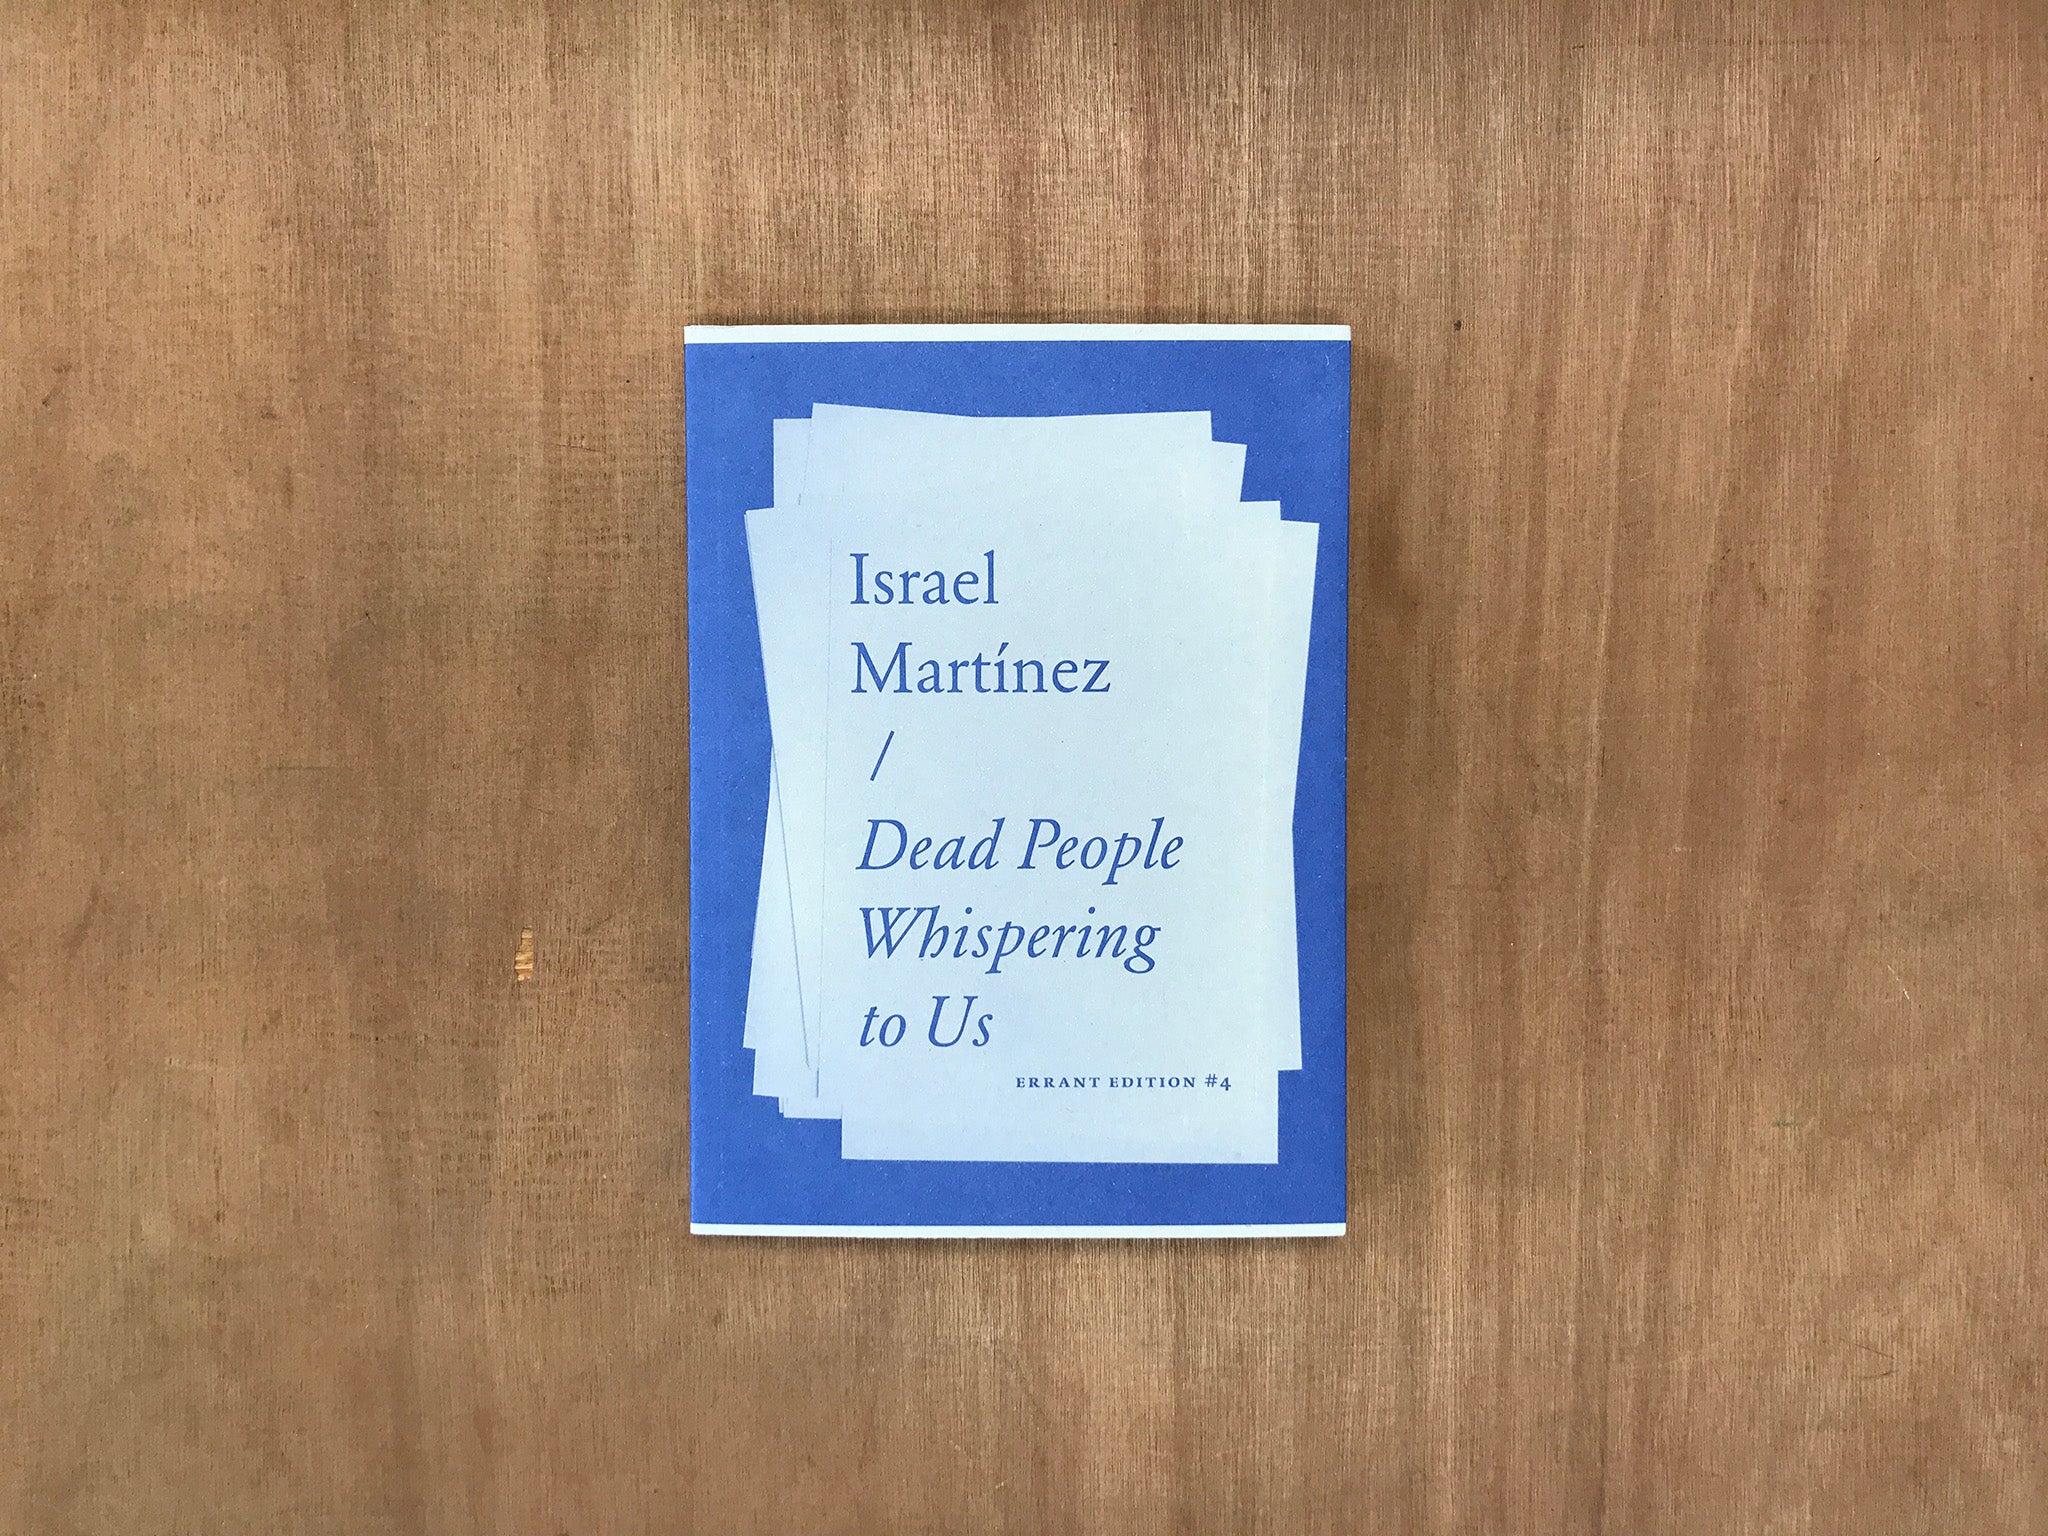 DEAD PEOPLE WHISPERING TO US by Israel Martínez